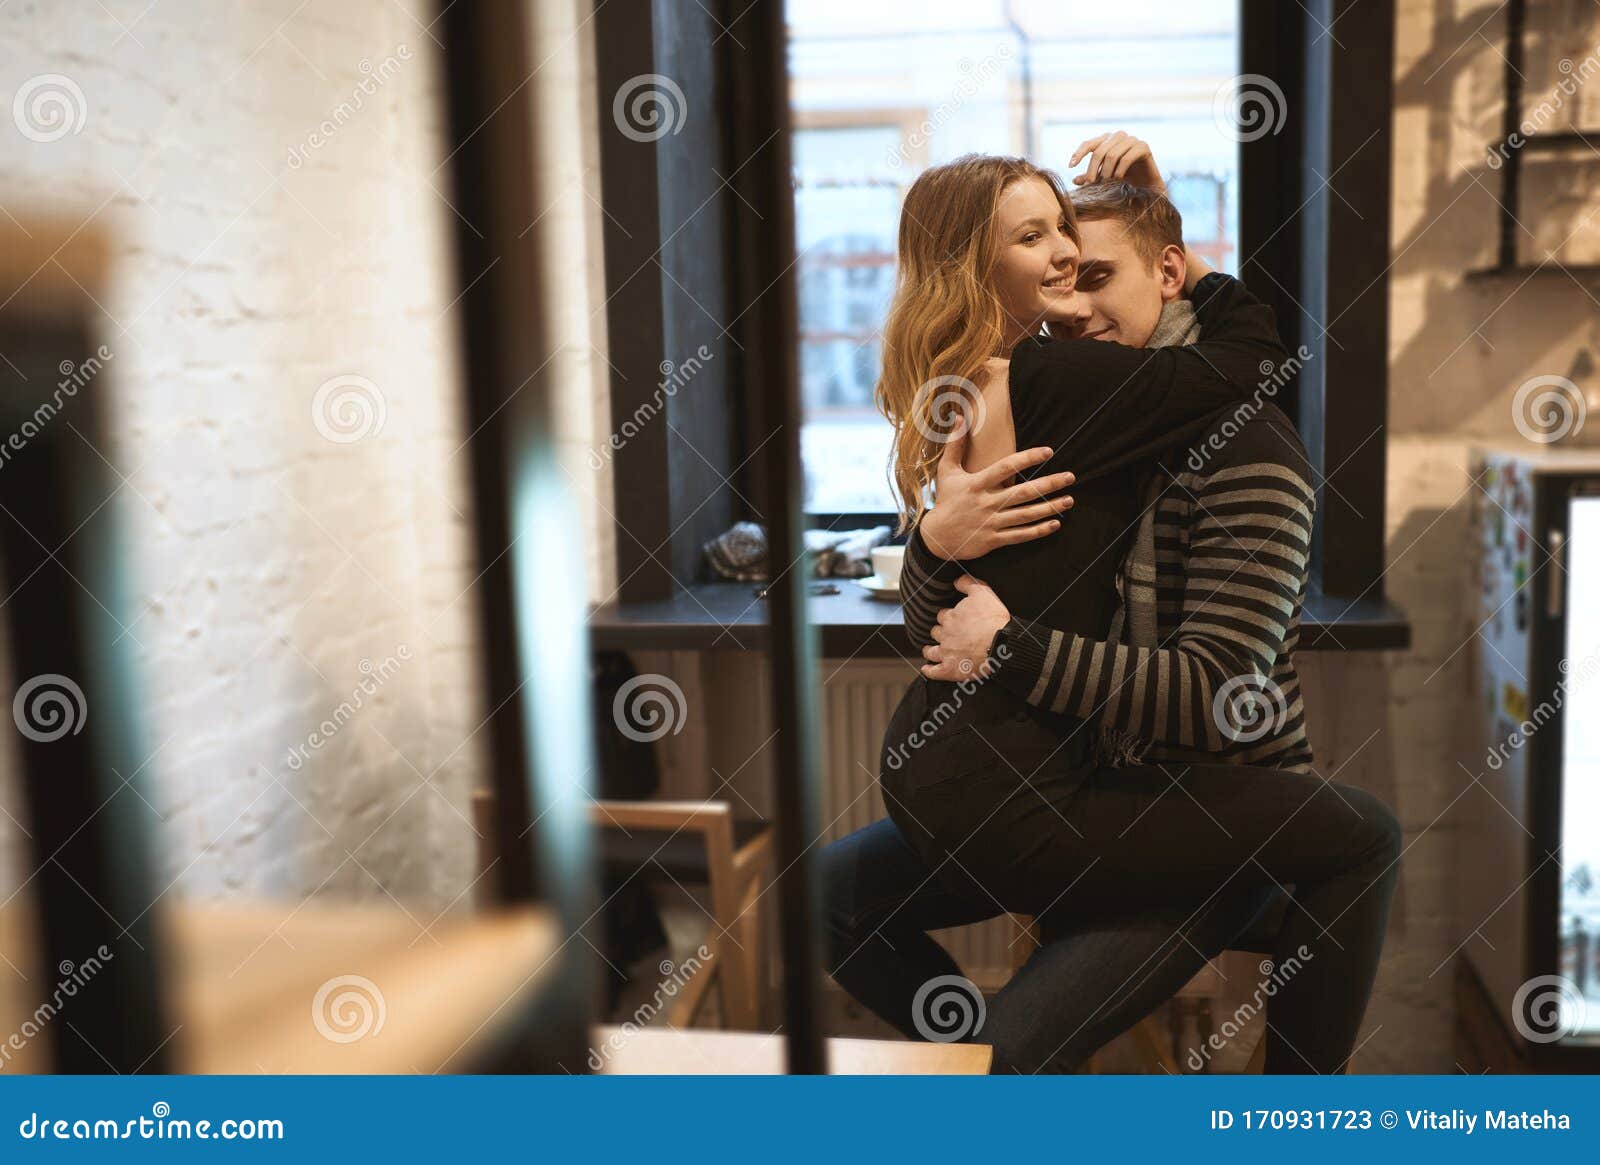 Romantic Happy Couple Sitting Over the Window in Cafe and Hugging ...